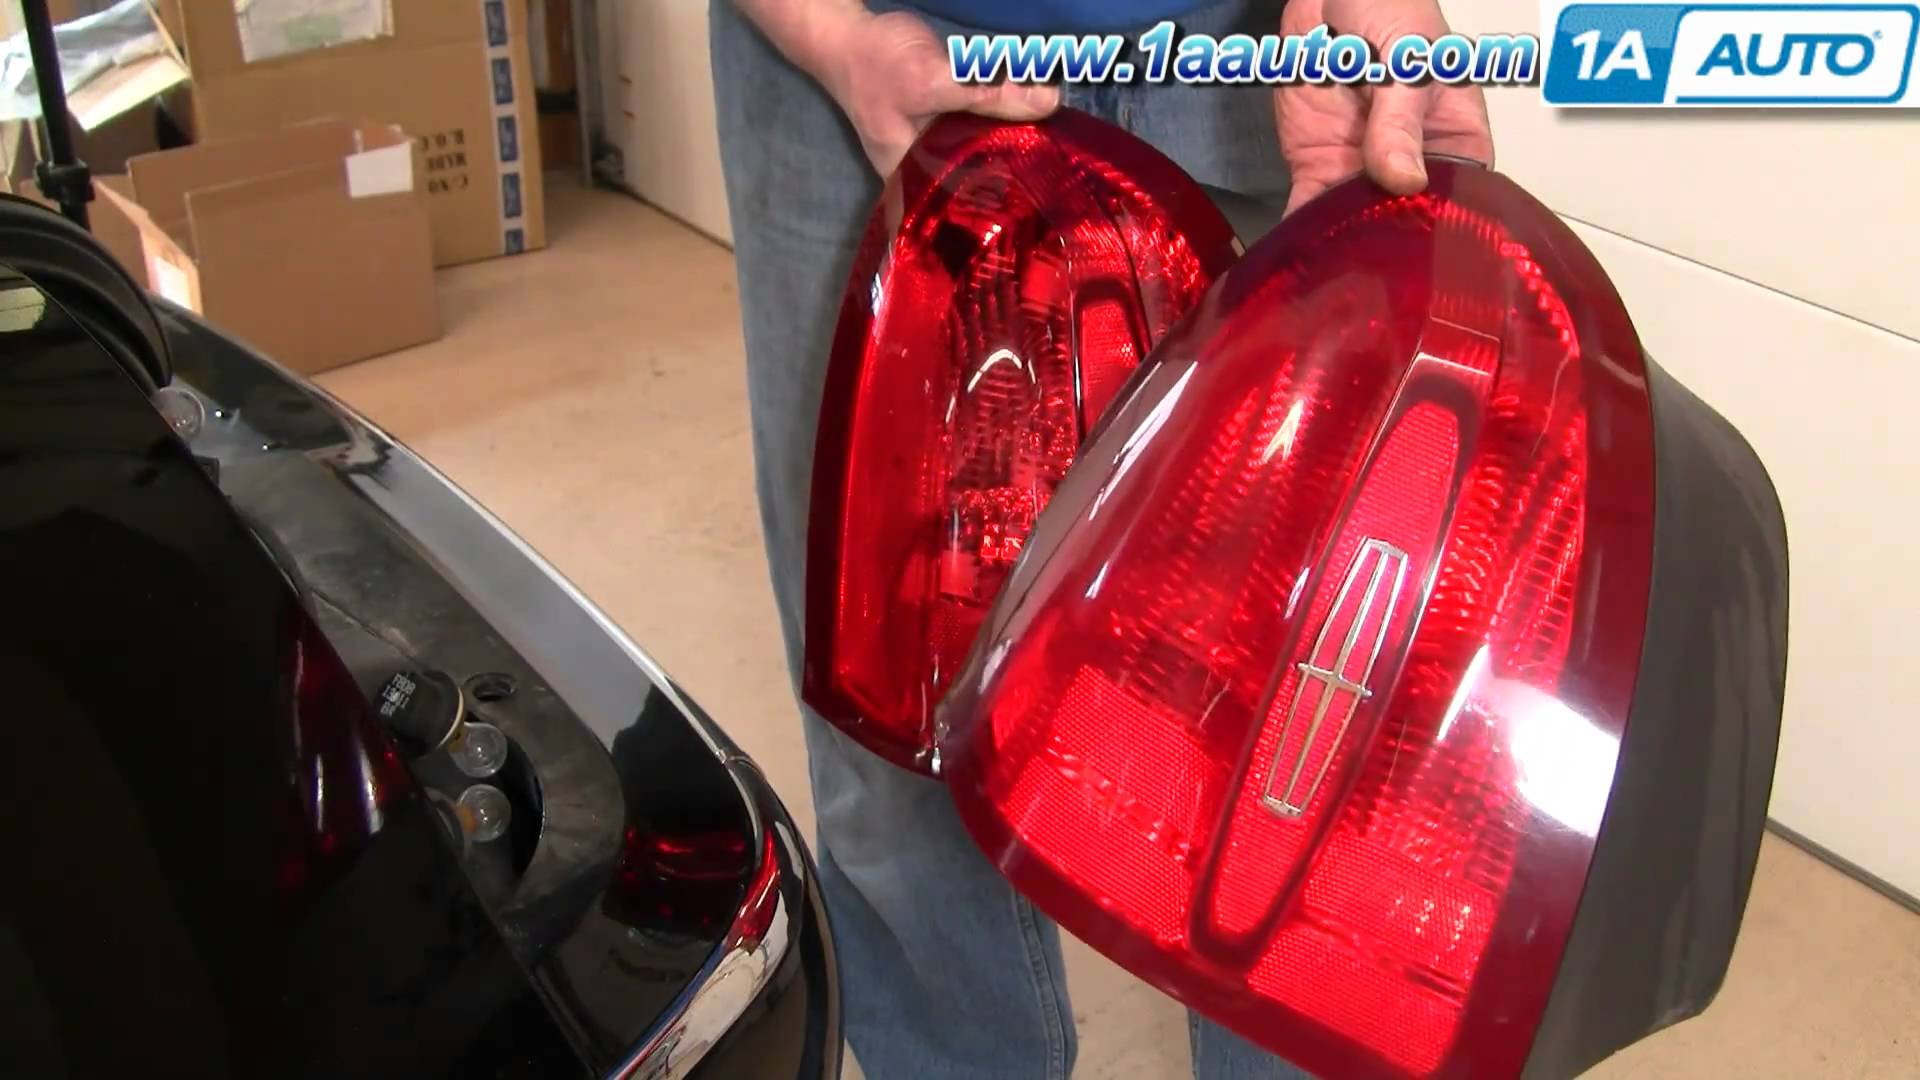 How To Install Repair Replace Broken Taillight Lincoln Town Car 98 ...